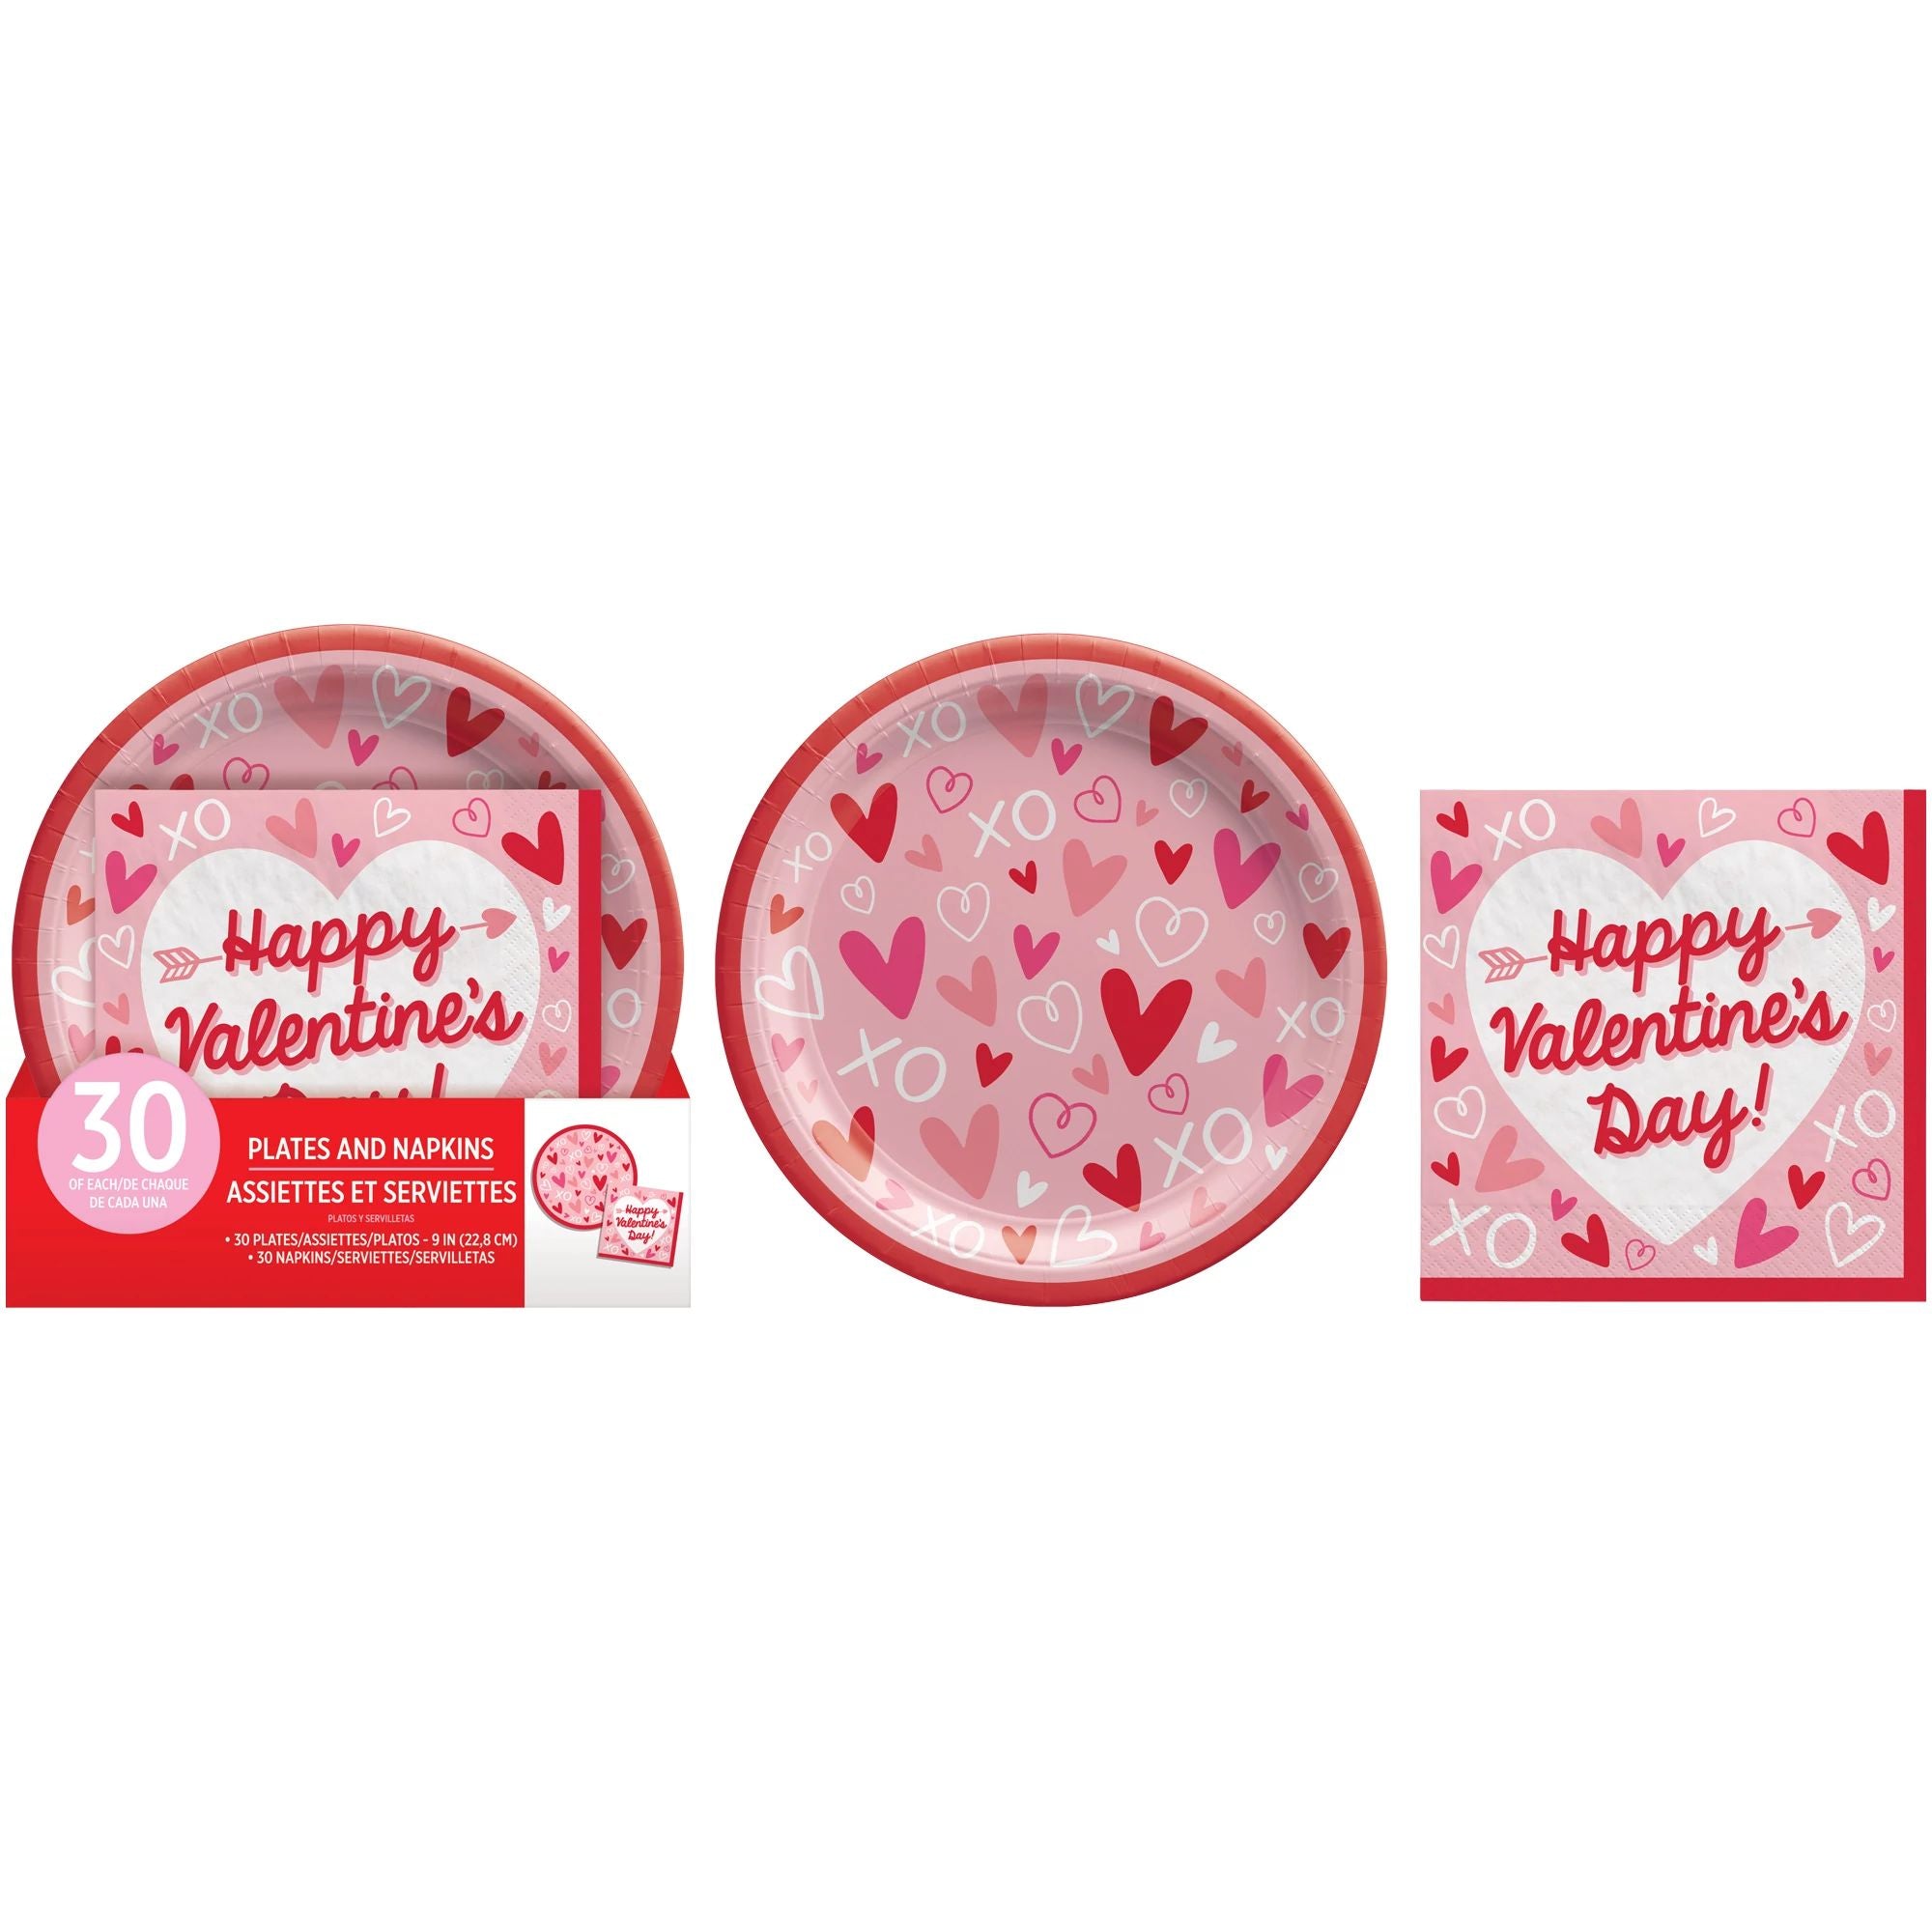 Valentine's Day Napkins and Plates